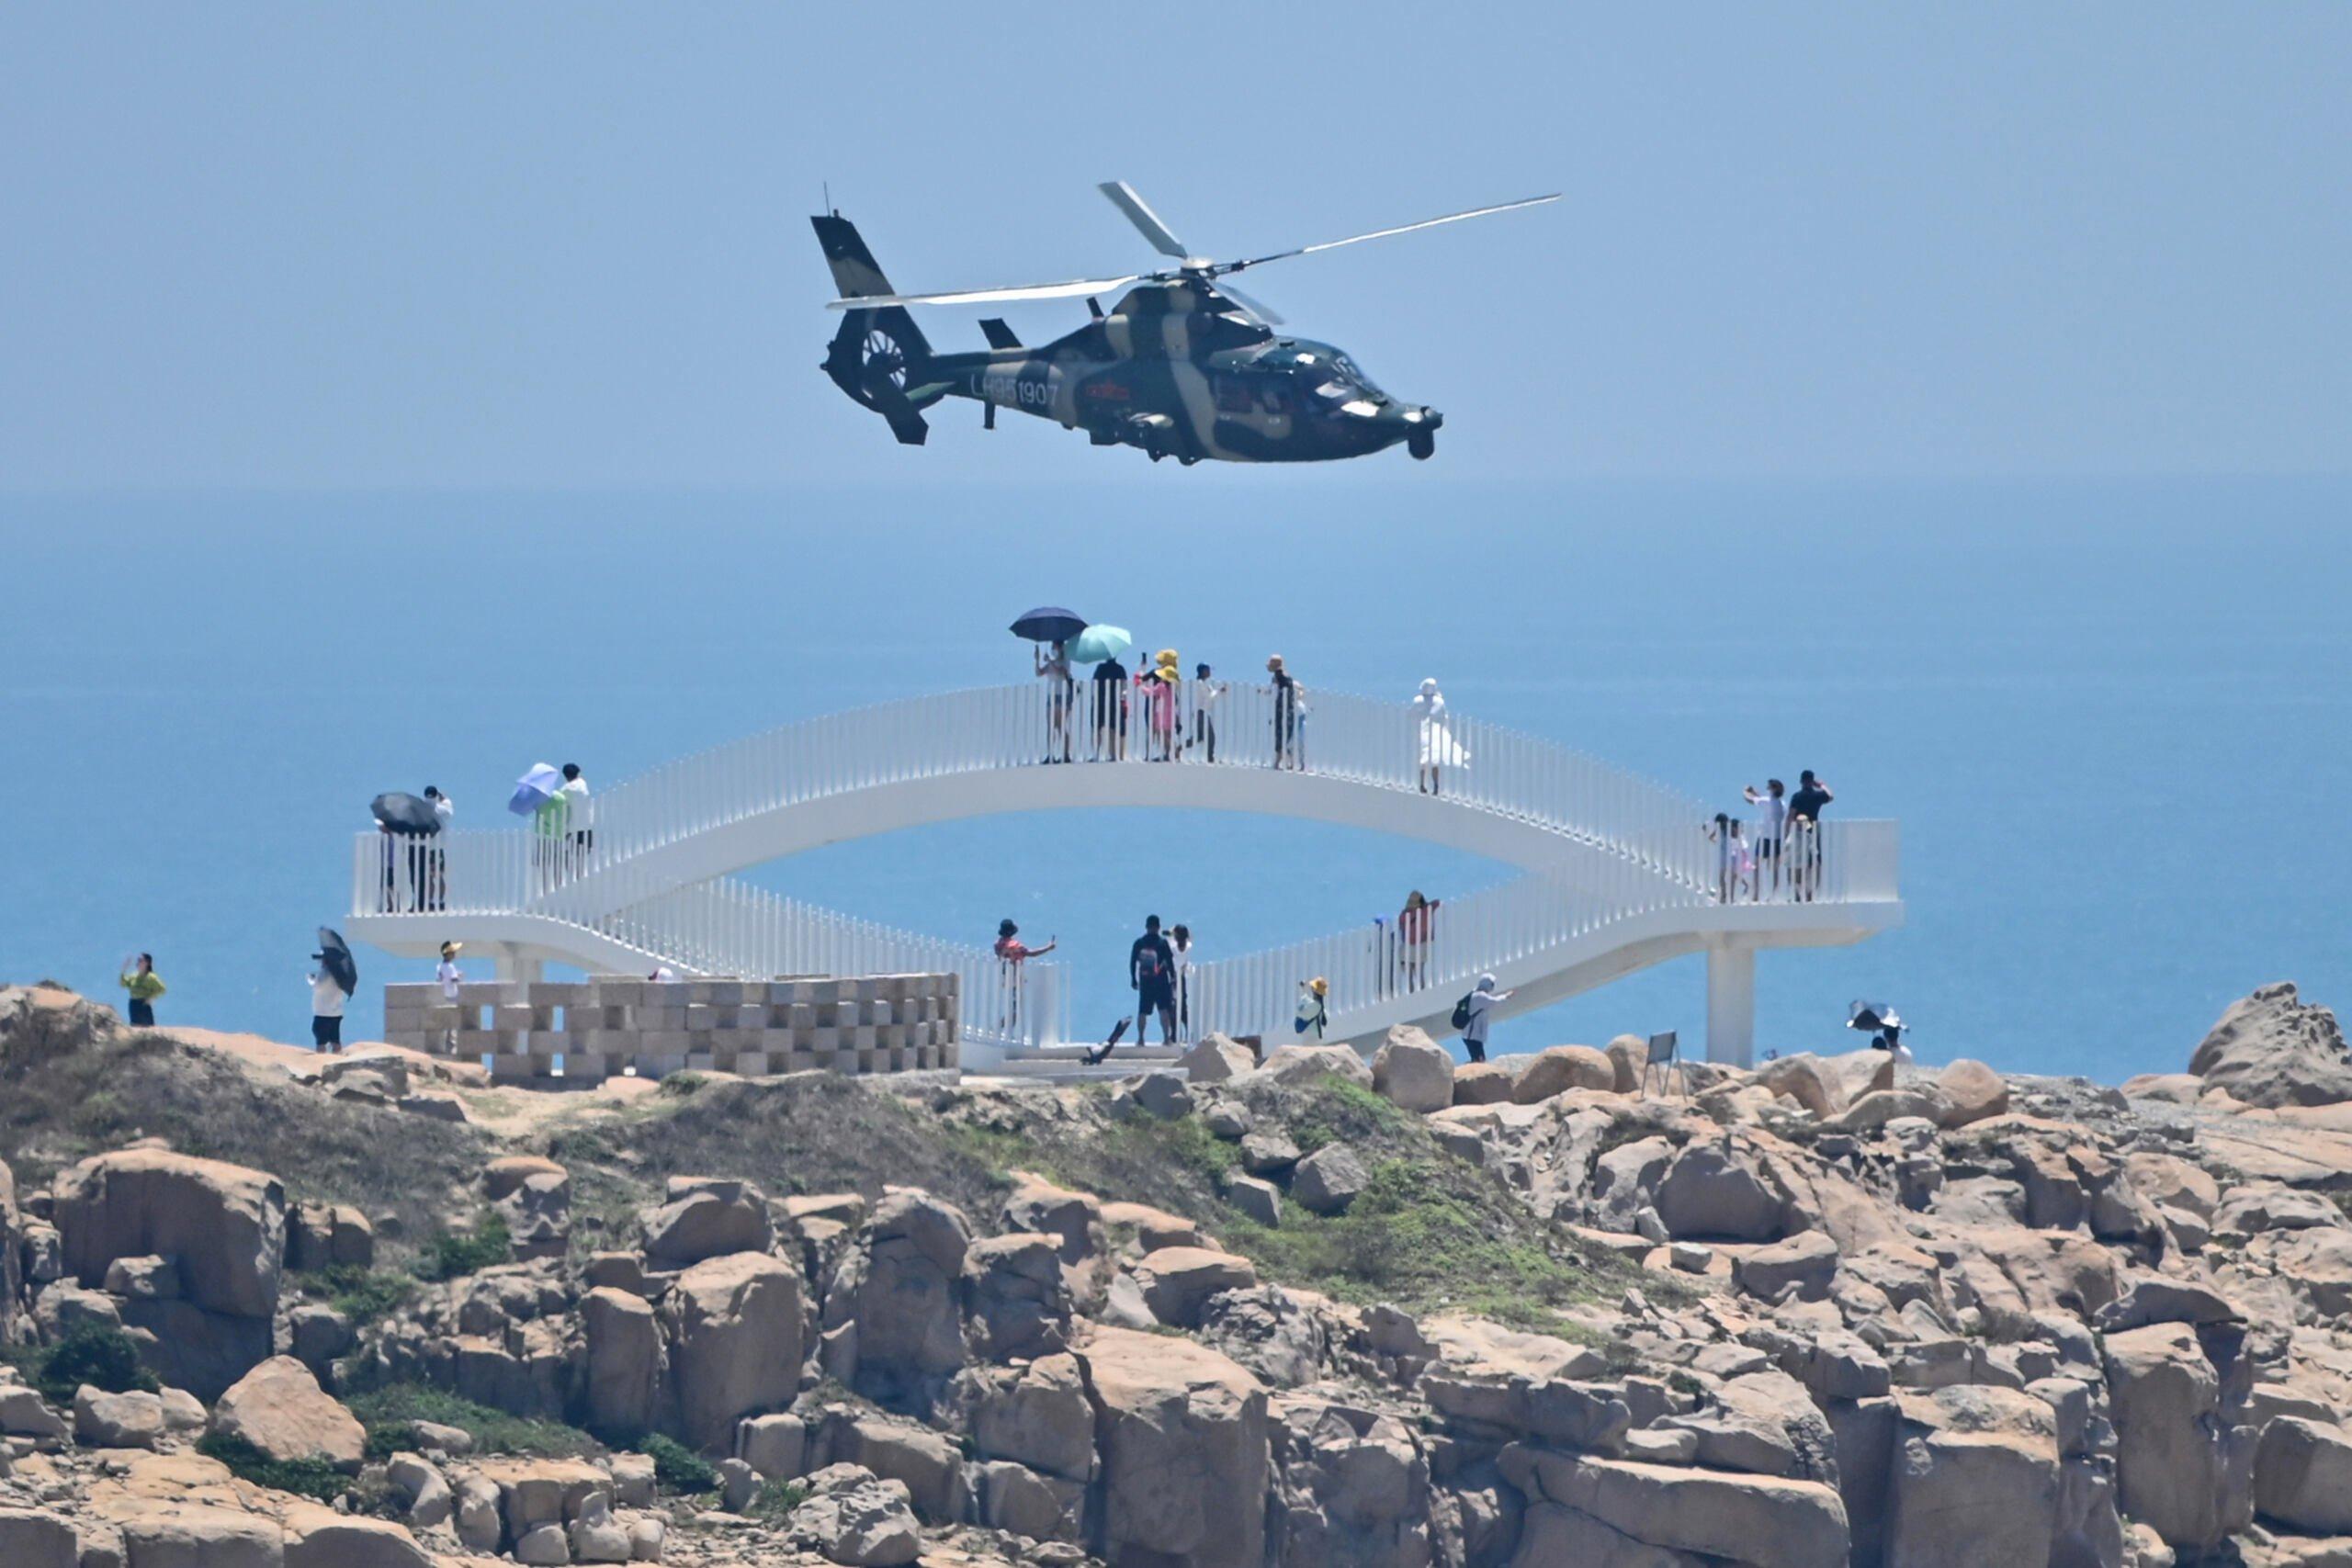 Tourists look on as a Chinese military helicopter flies past Pingtan island, one of mainland China's closest point from Taiwan, in Fujian province on August 4, 2022, ahead of massive military drills off Taiwan following US House Speaker Nancy Pelosi's visit to the self-ruled island. - China is due on August 4 to kick off its largest-ever military exercises encircling Taiwan, in a show of force straddling vital international shipping lanes following a visit to the self-ruled island by US House Speaker Nancy Pelosi. (Photo by Hector RETAMAL / AFP)